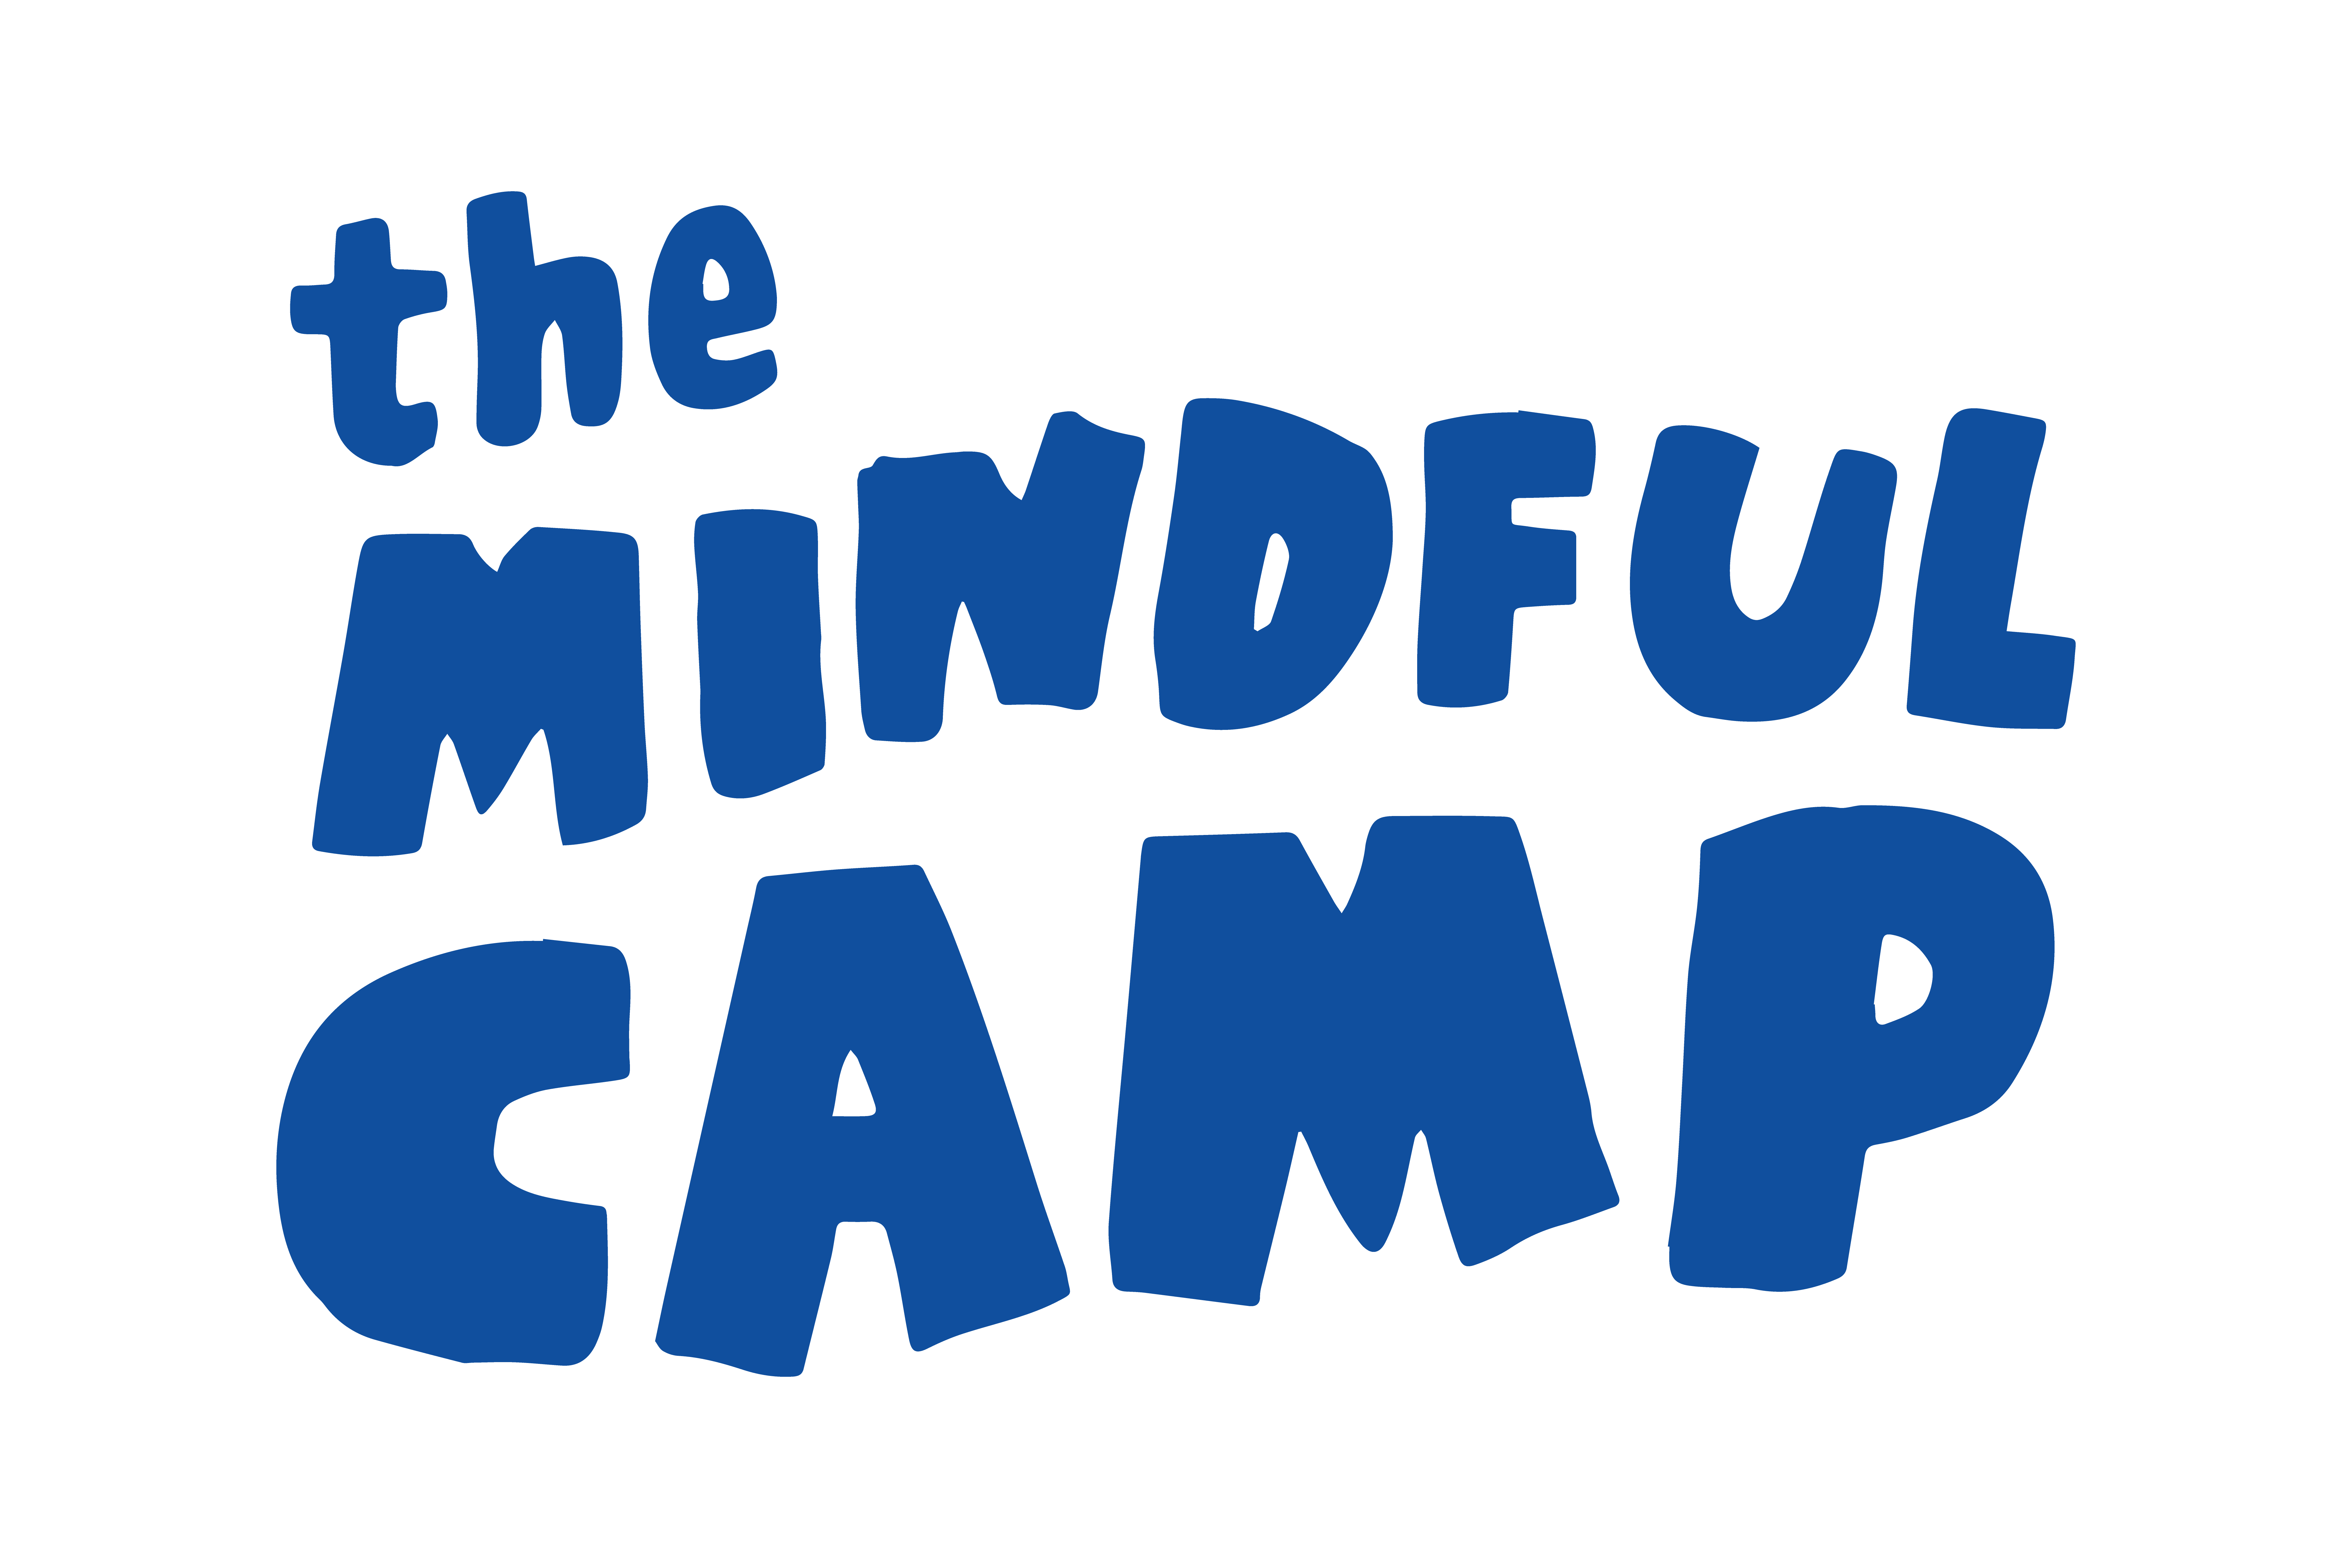 The Mindful Camp (S) Pte Ltd Recognized